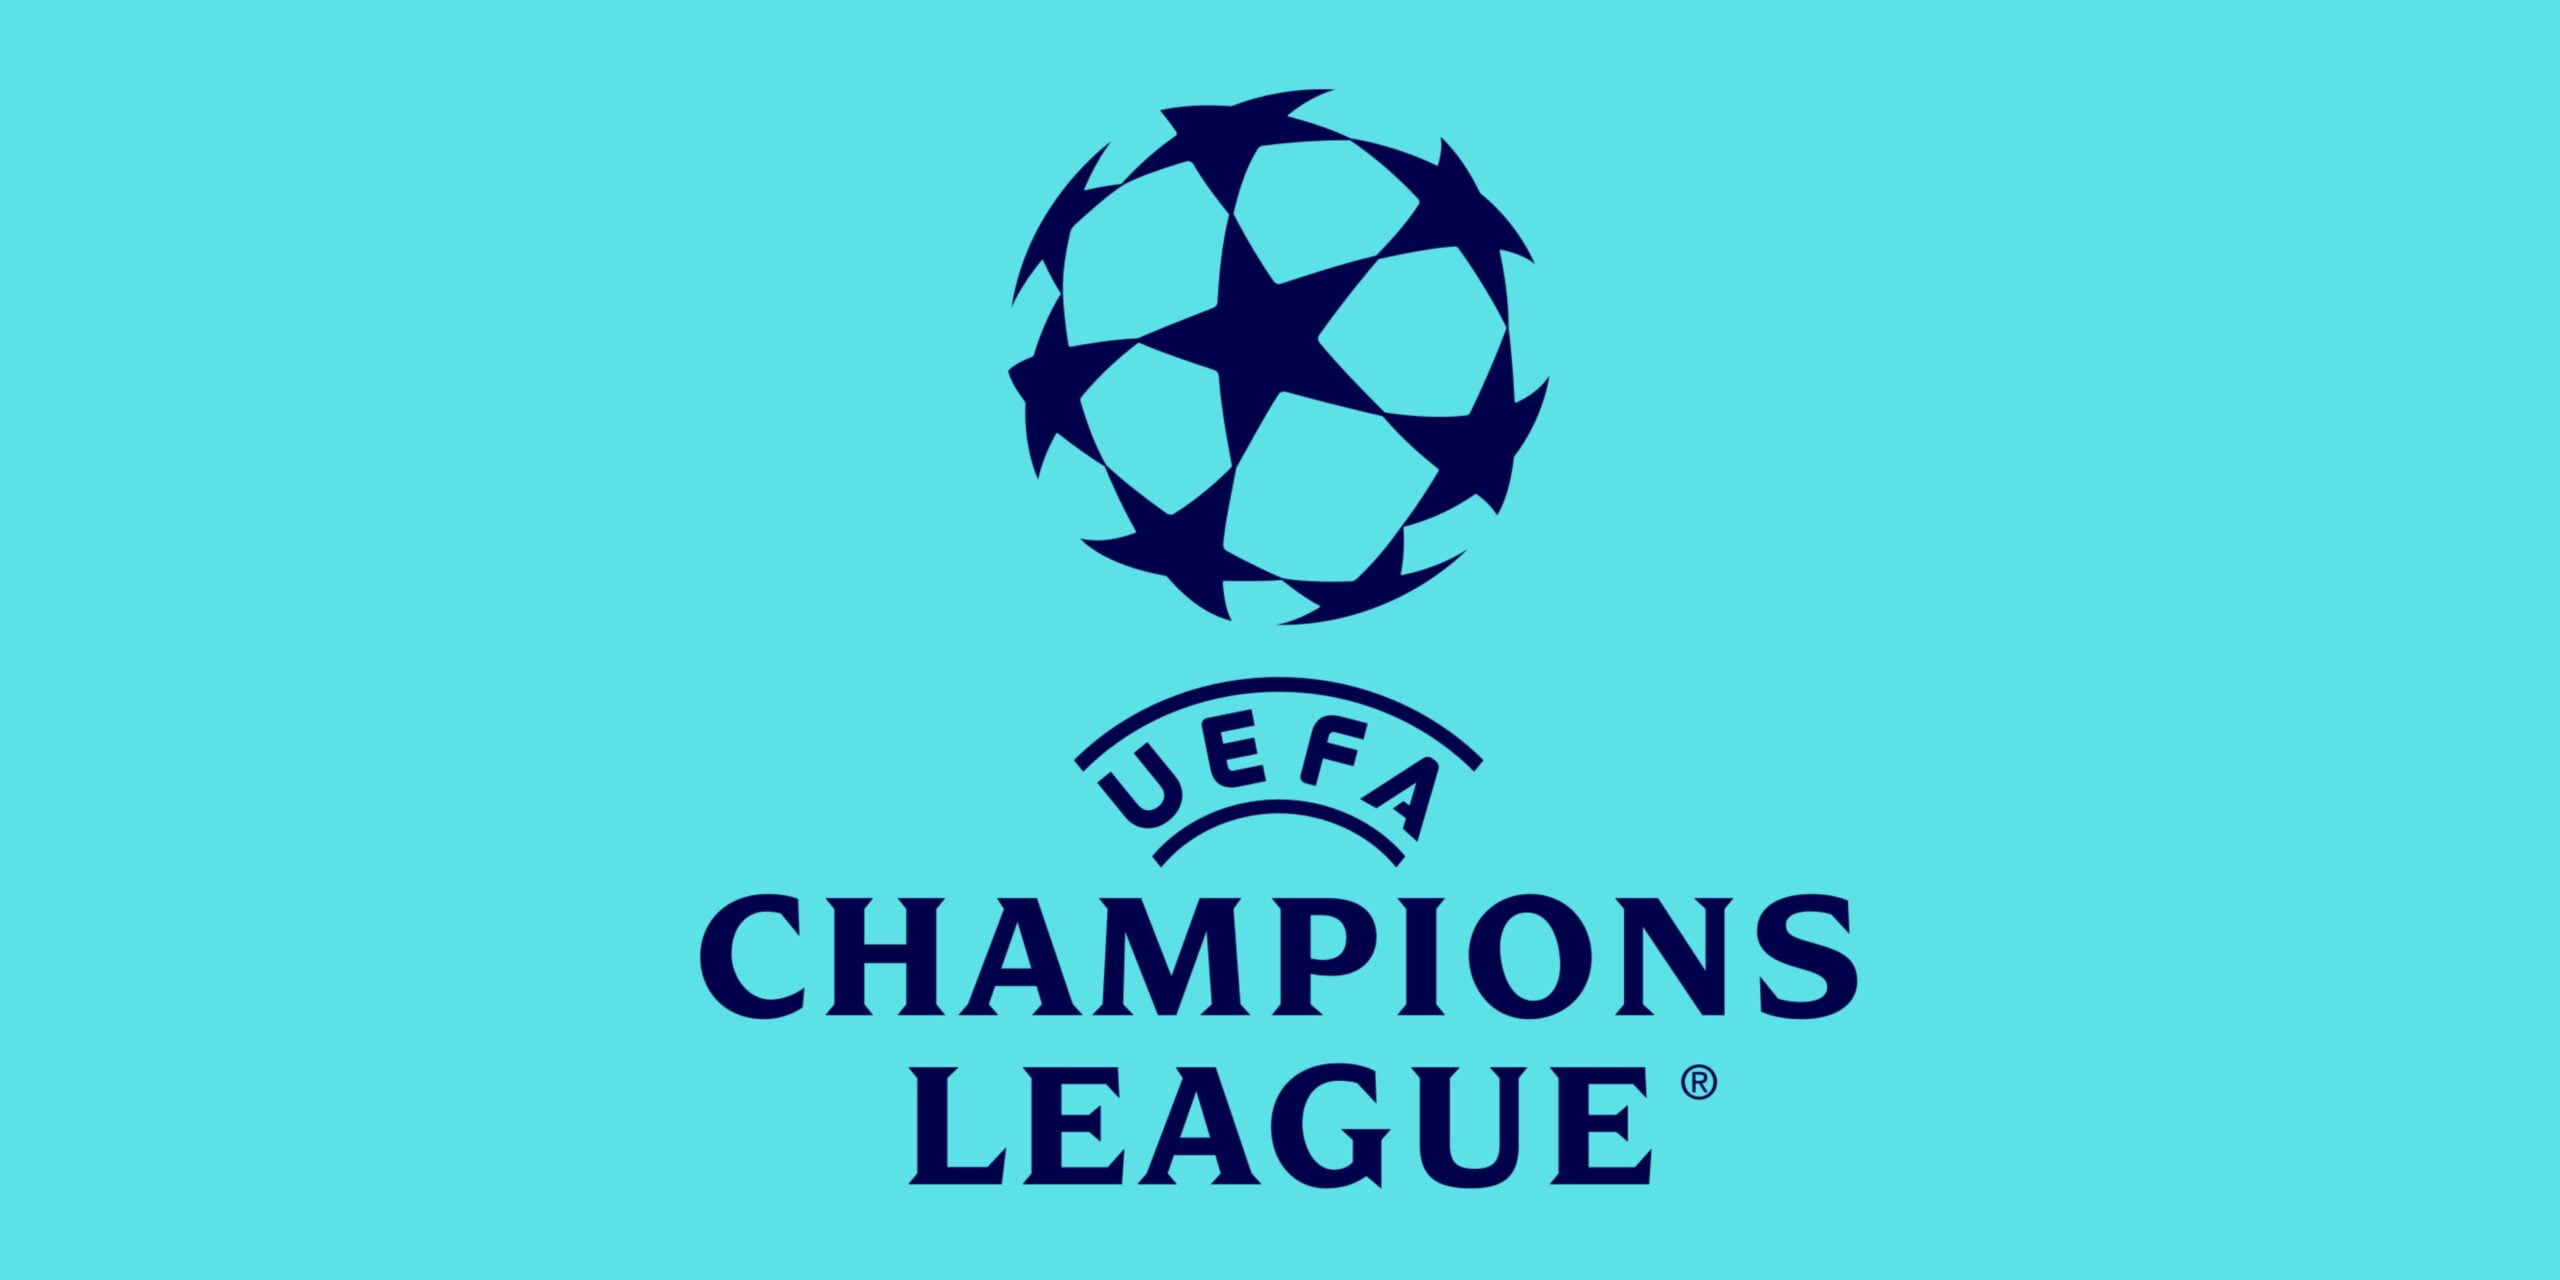 How To Watch Champions League Live Online in 2021-22 | How To Watch UEFA Champions League